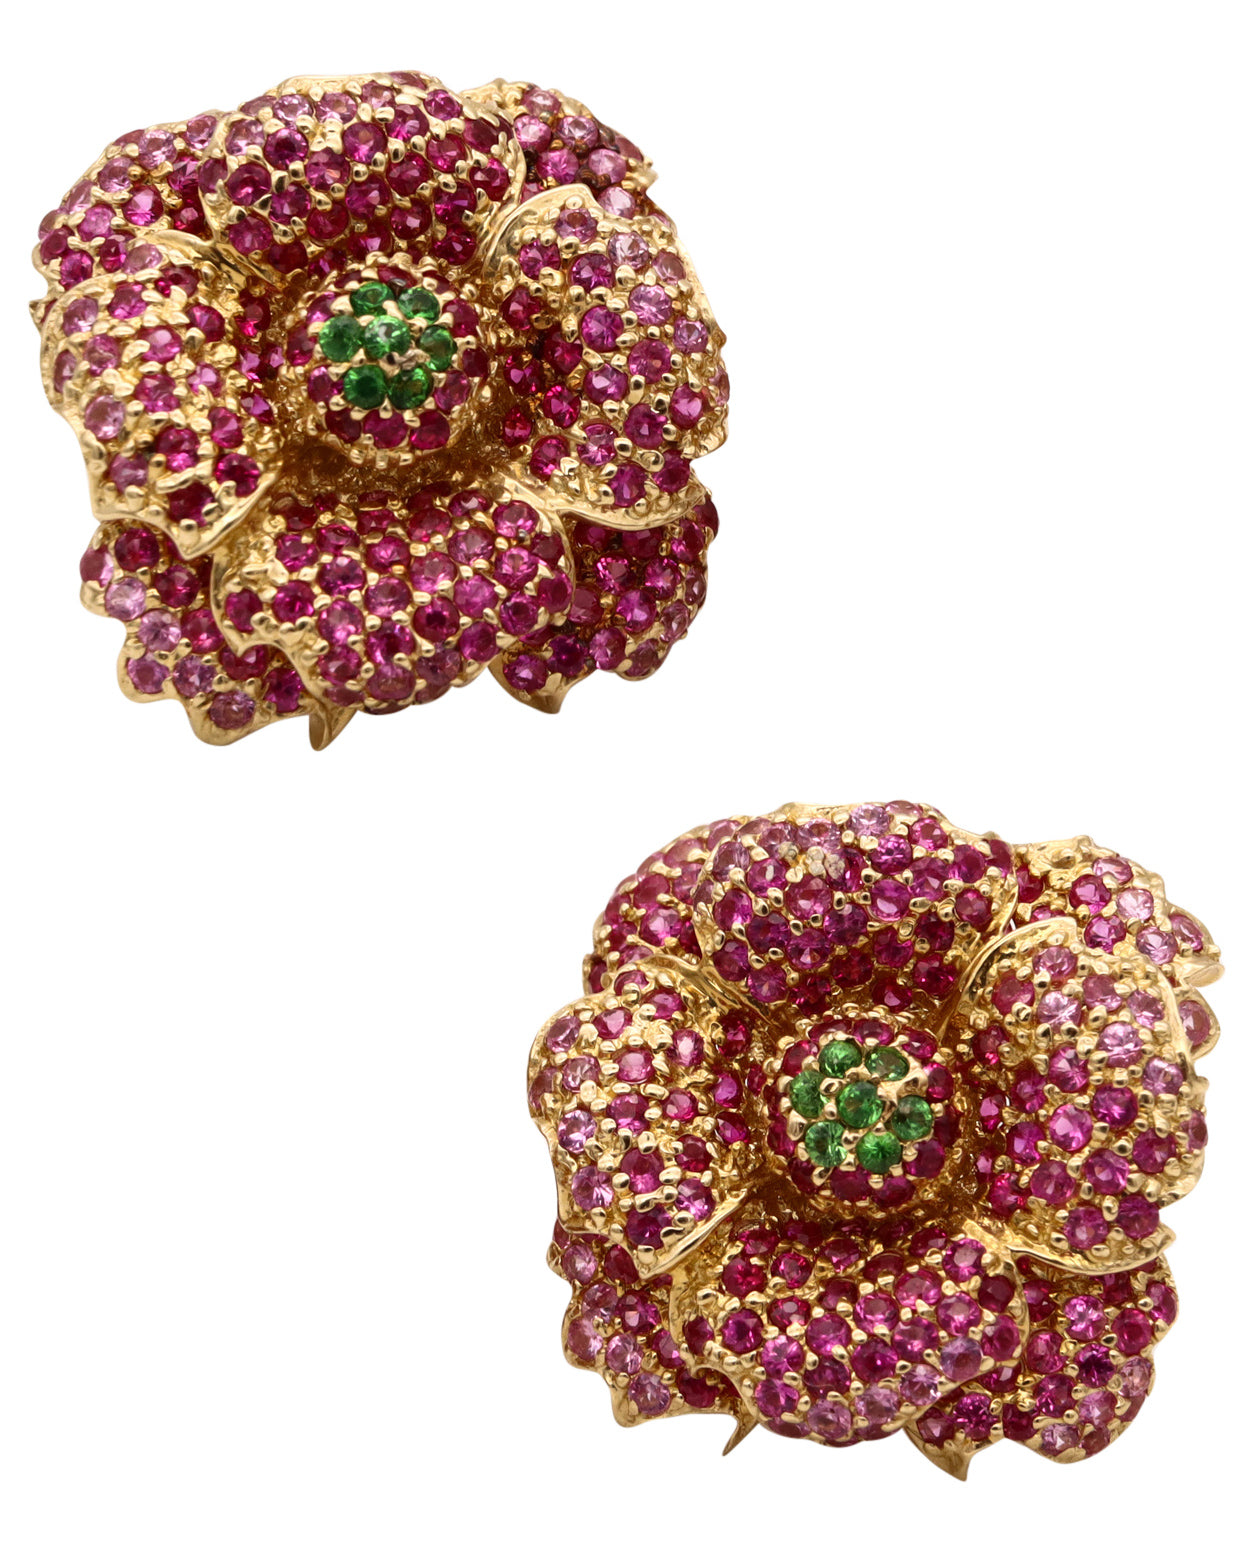 *Sonia Bitton flower bouquet earrings in 18 kt yellow gold with 4.96 Cts in rubies & tsavorites